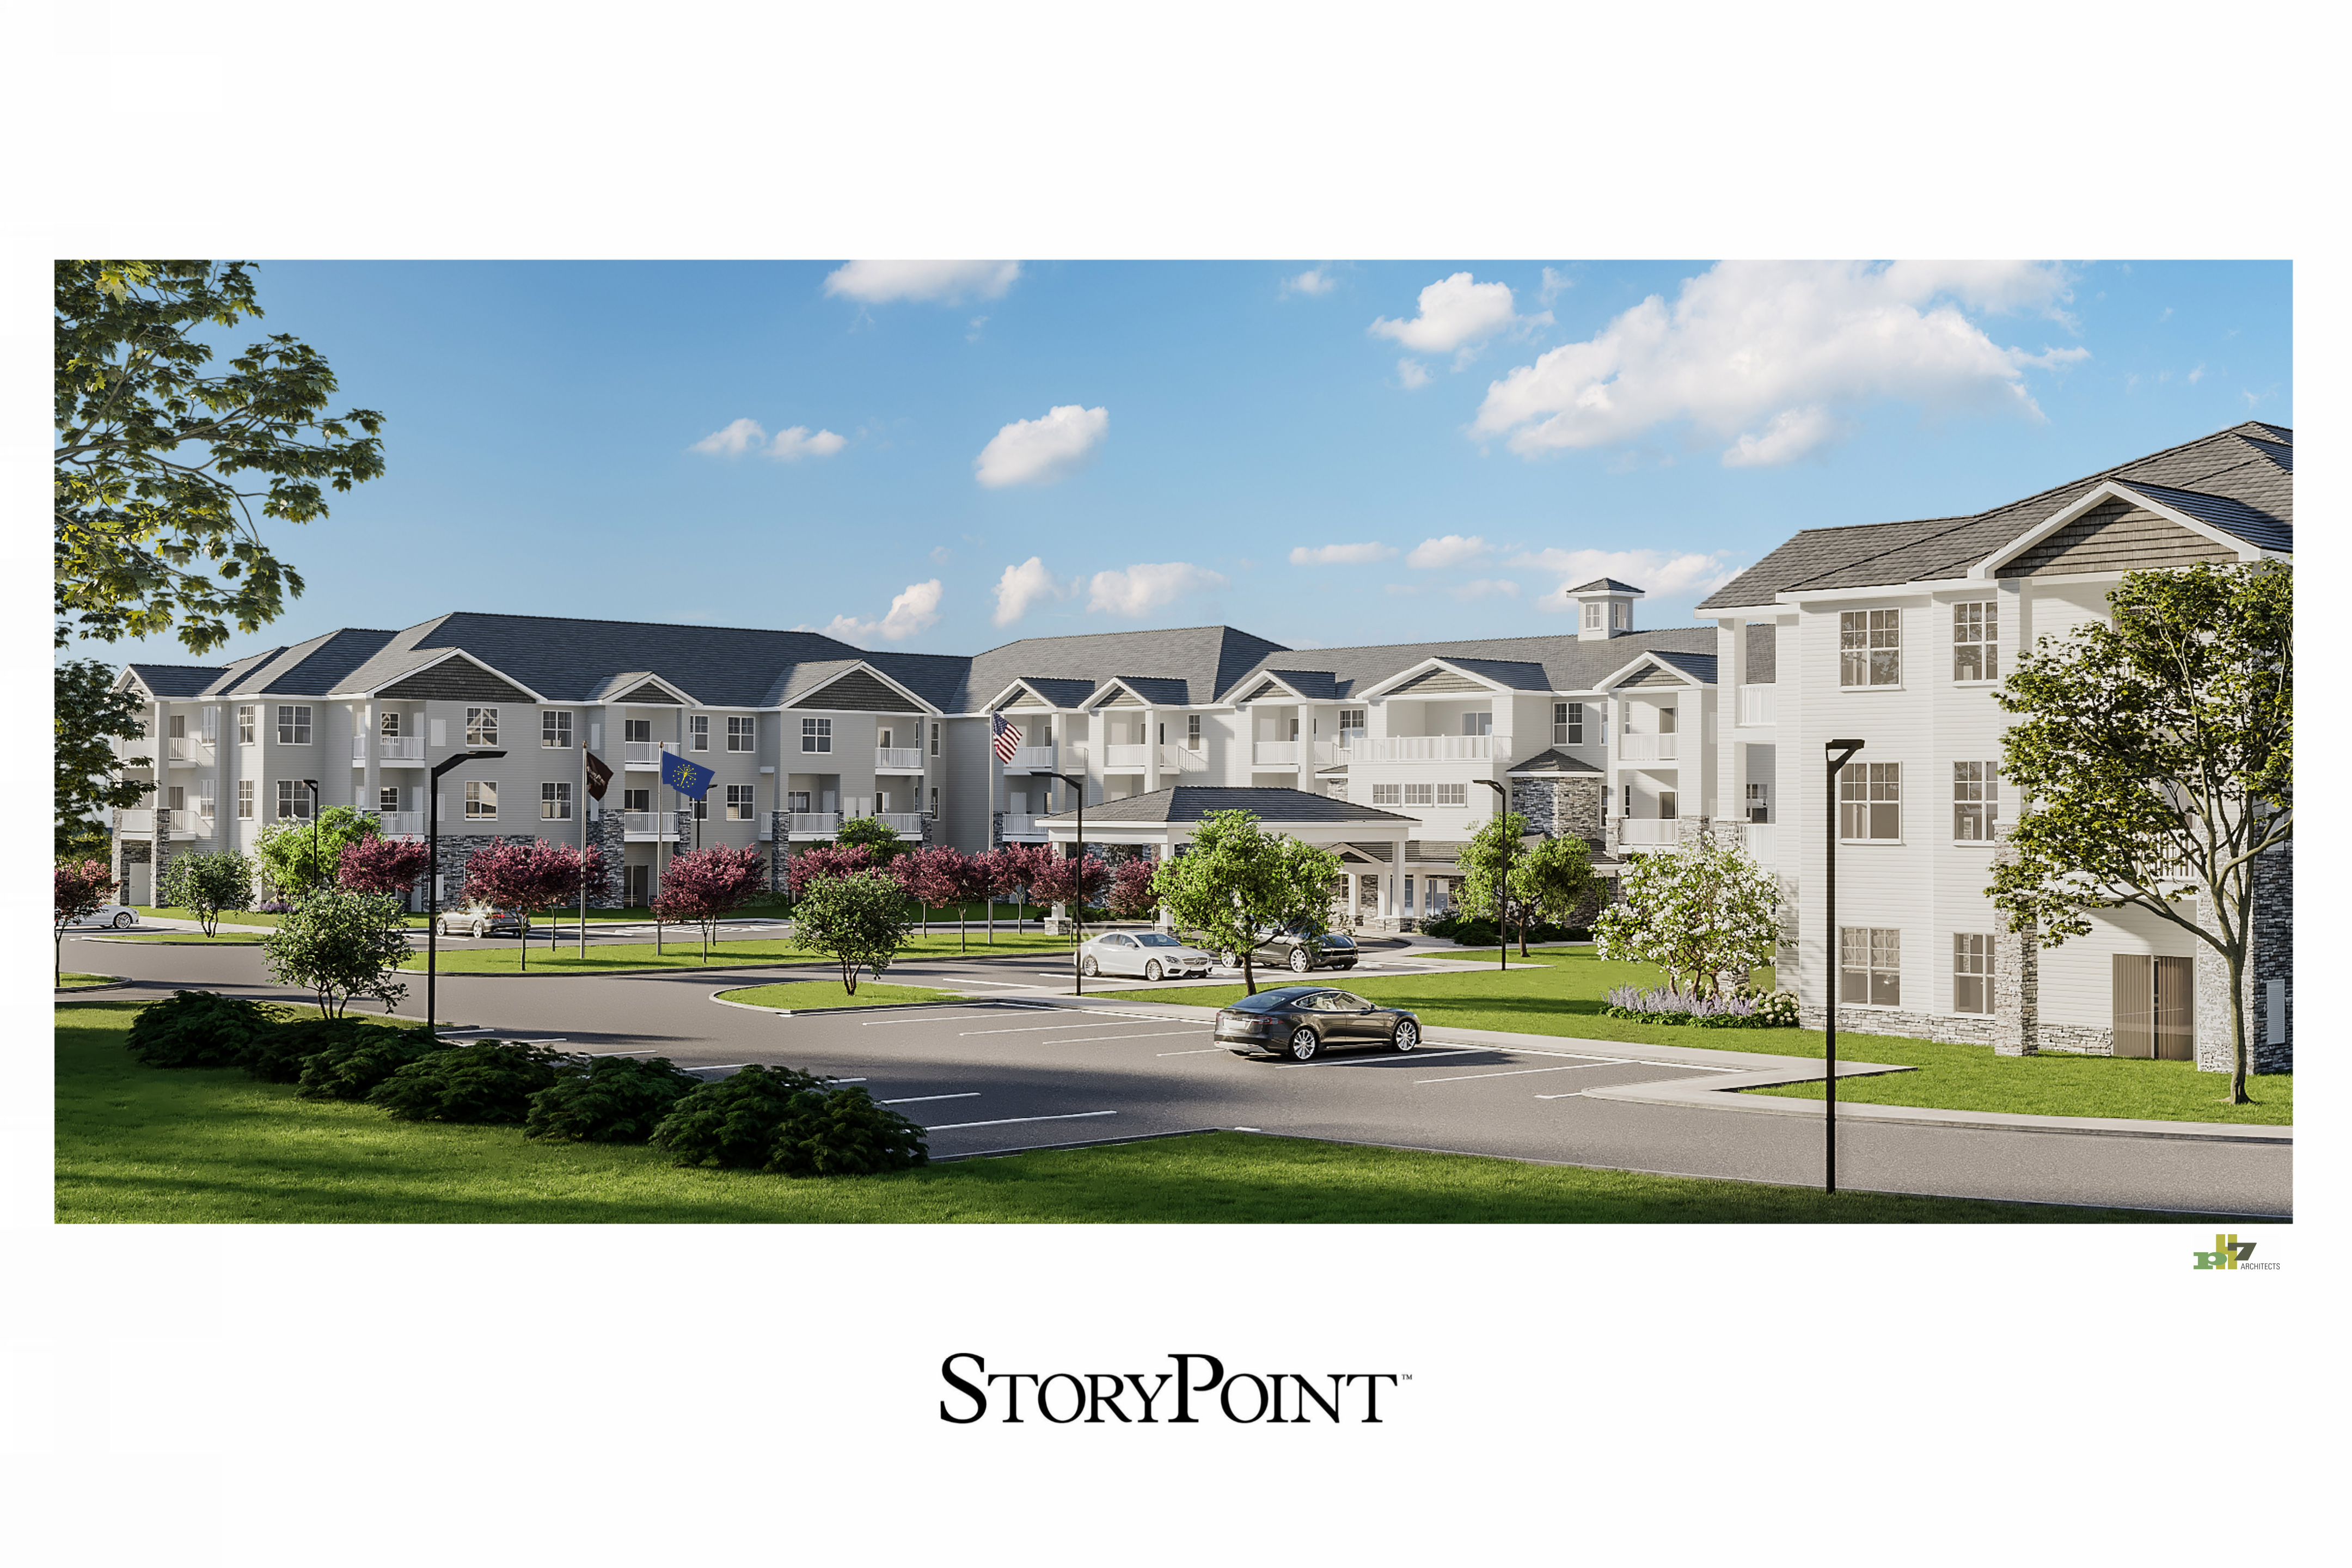 StoryPoint Chesterton Community Exterior